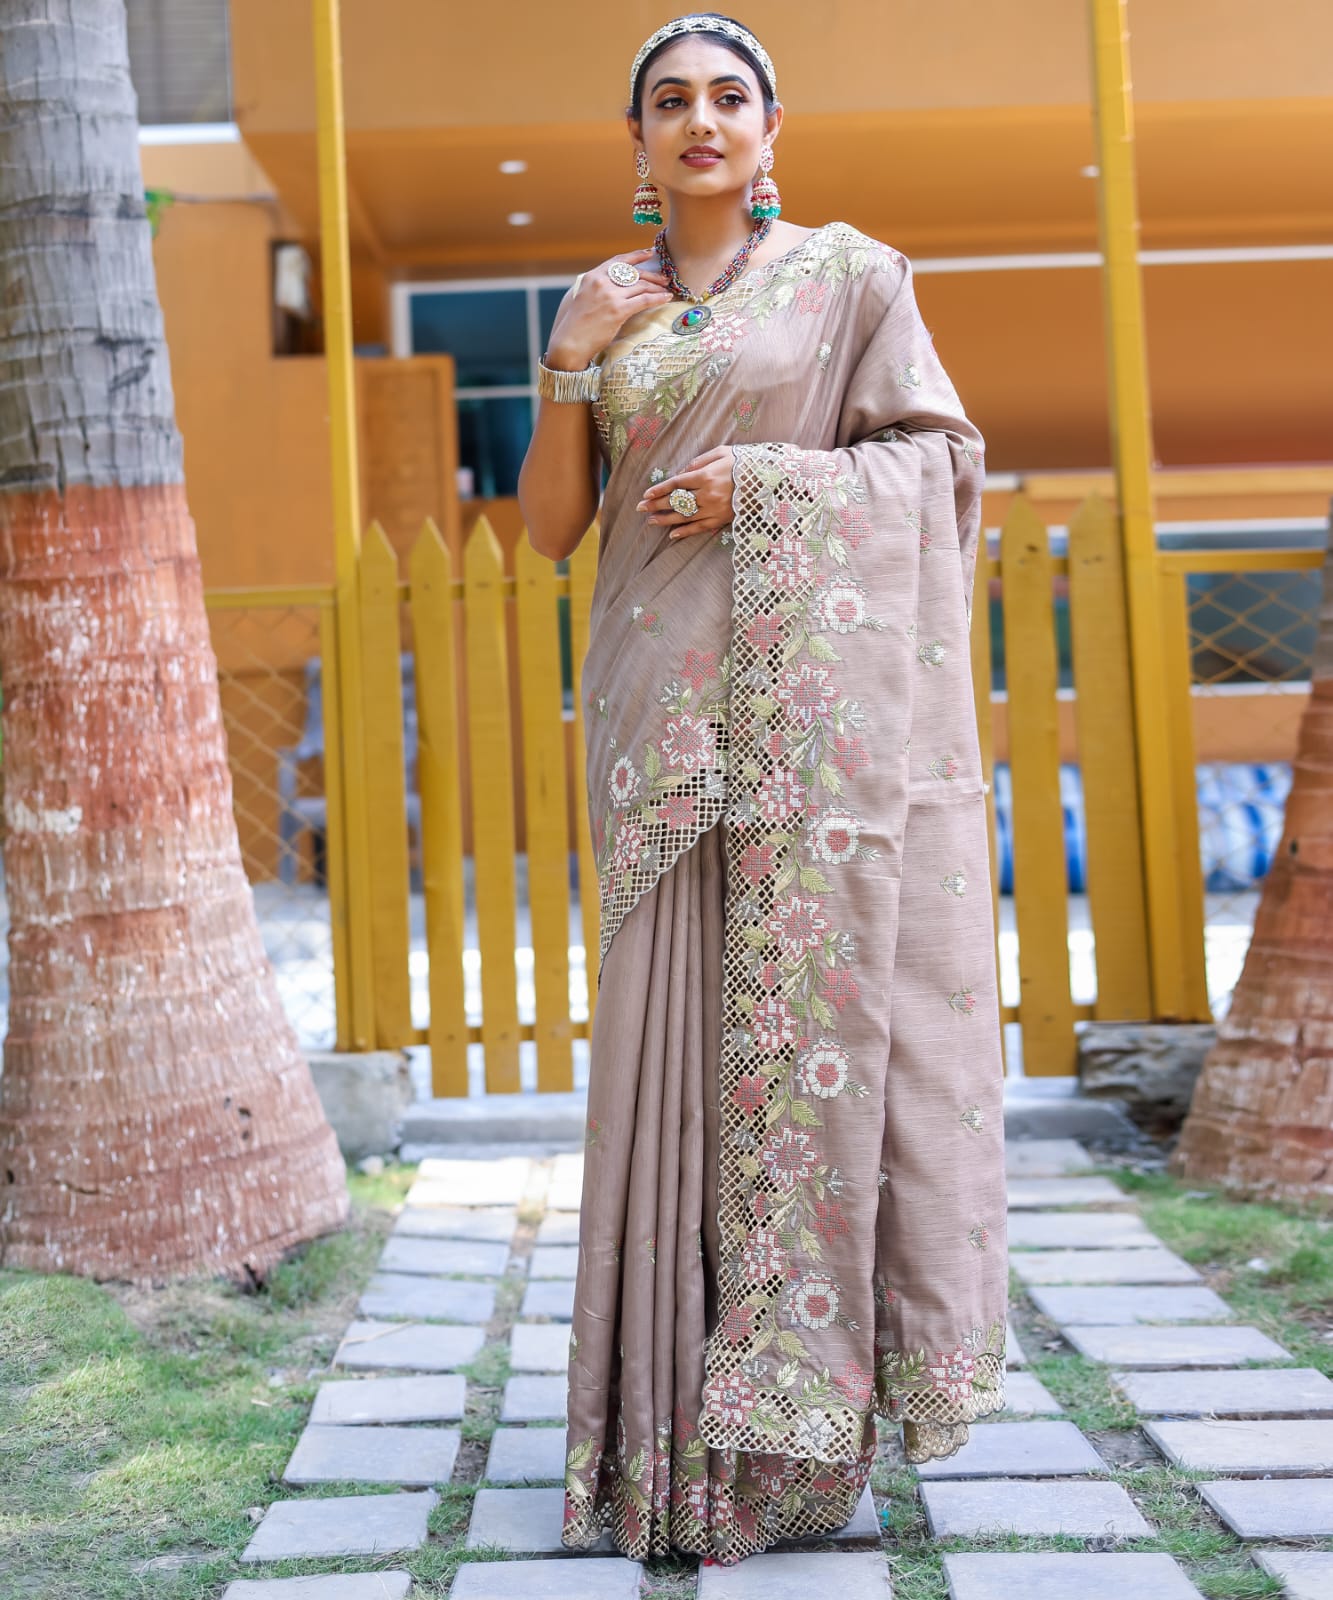 "Pure Marks Silk Elegance: Contrast Embroidery Saree with Cutwork Border & Full Work Blouse - Timeless Tradition Meets Modern Style"